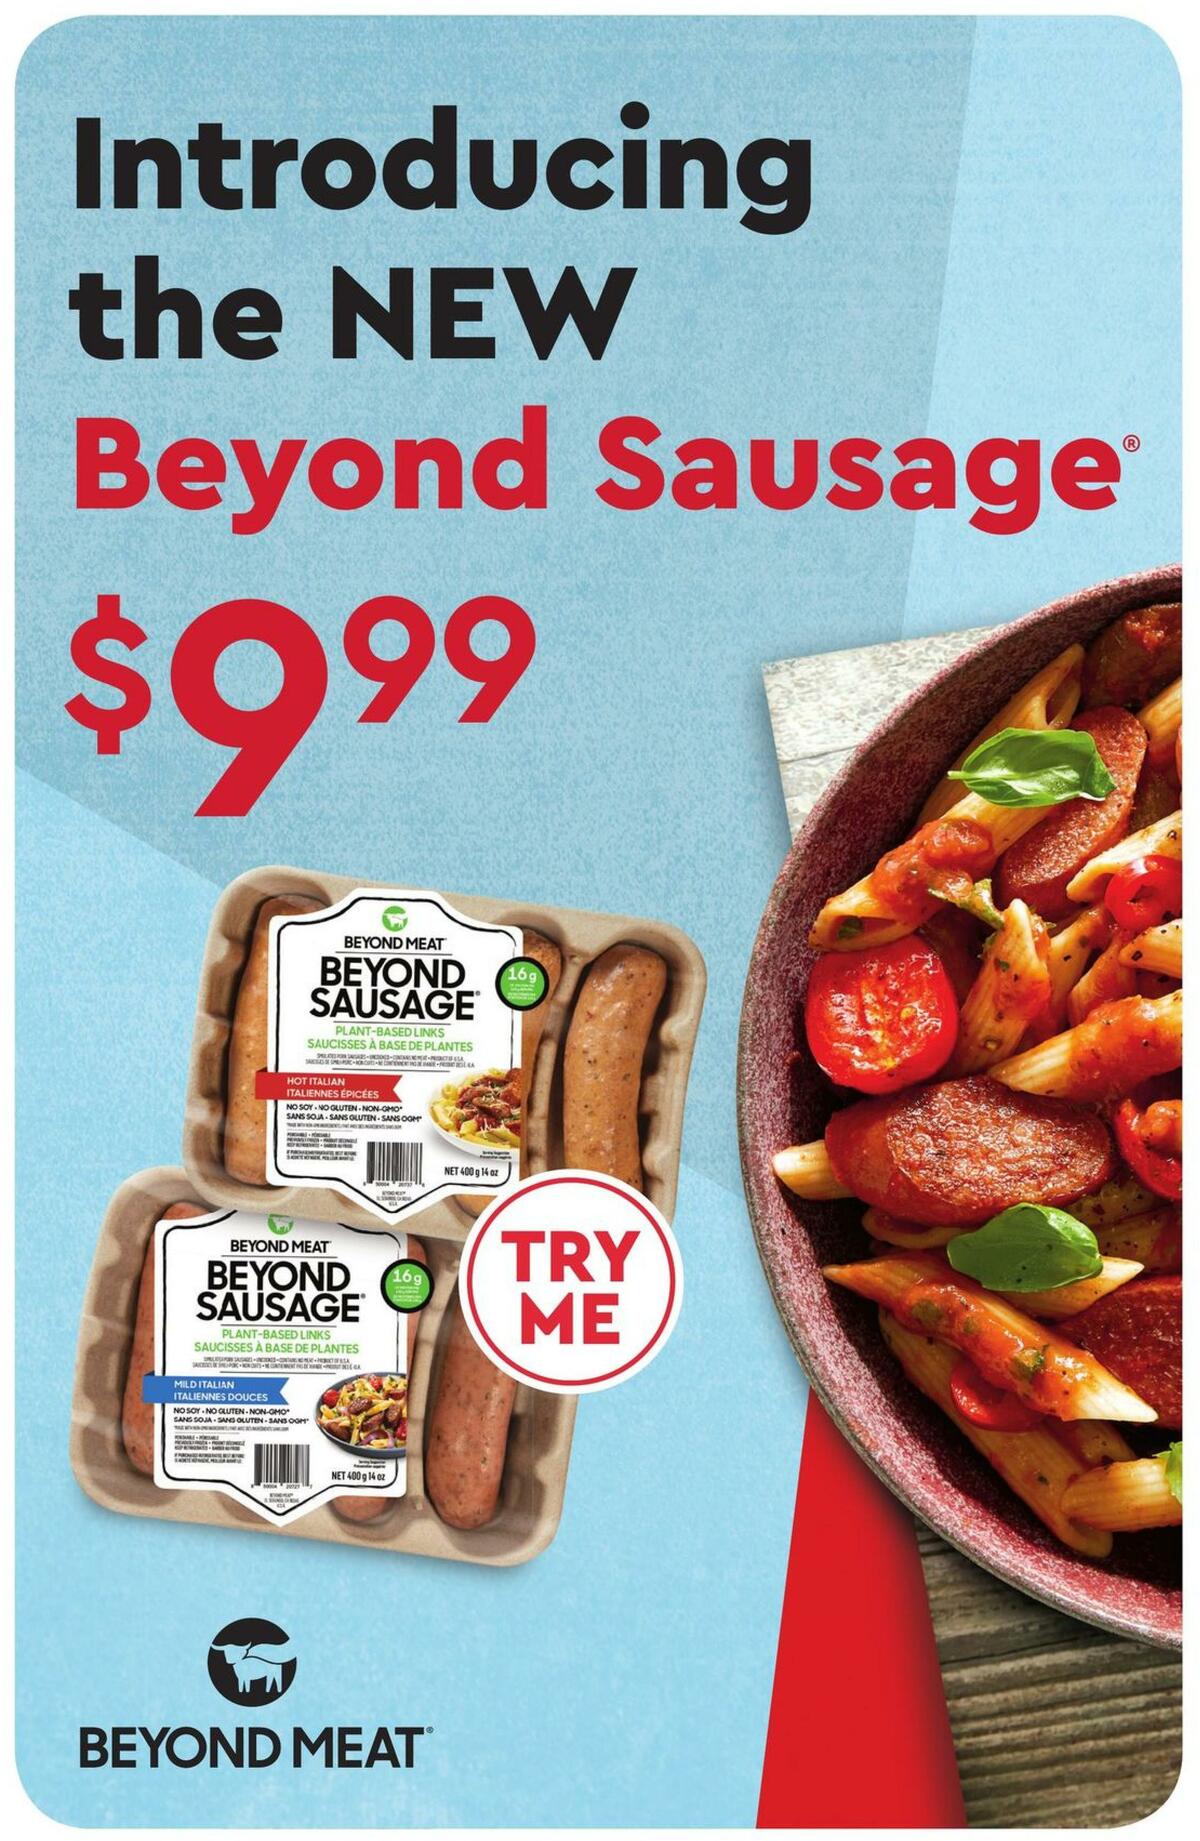 Safeway Flyer from May 14